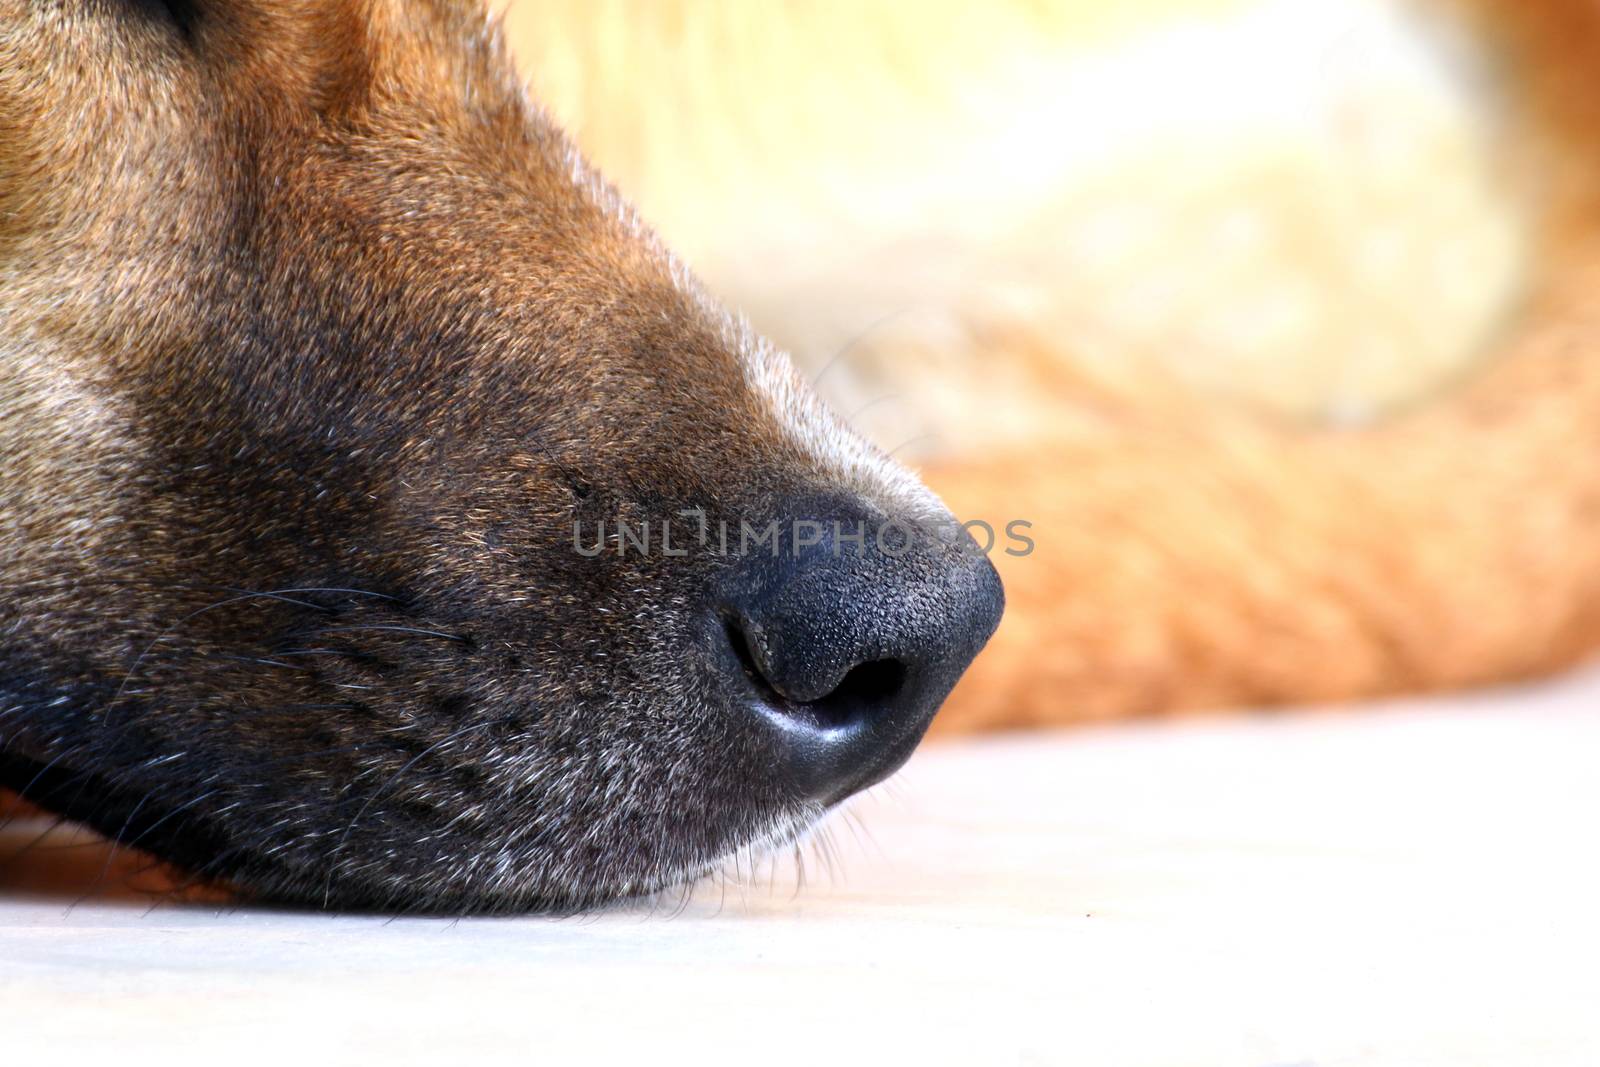 Dog nose, Nose of dog close up (Selective focus) by cgdeaw